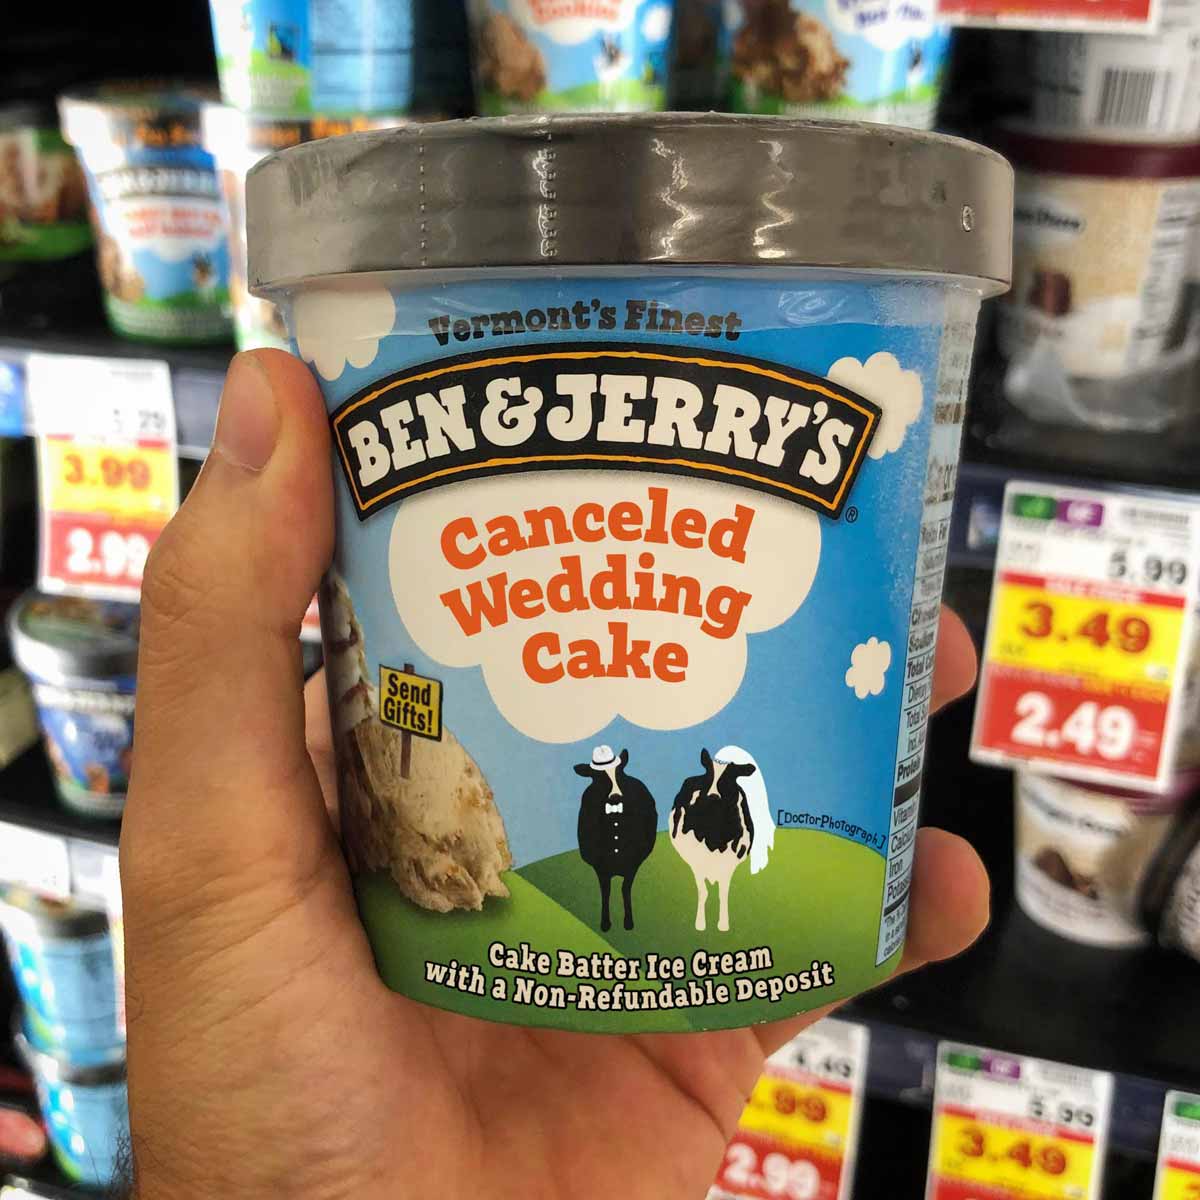 Funny Ben and Jerrys ice cream flavor 'canceled wedding cake'